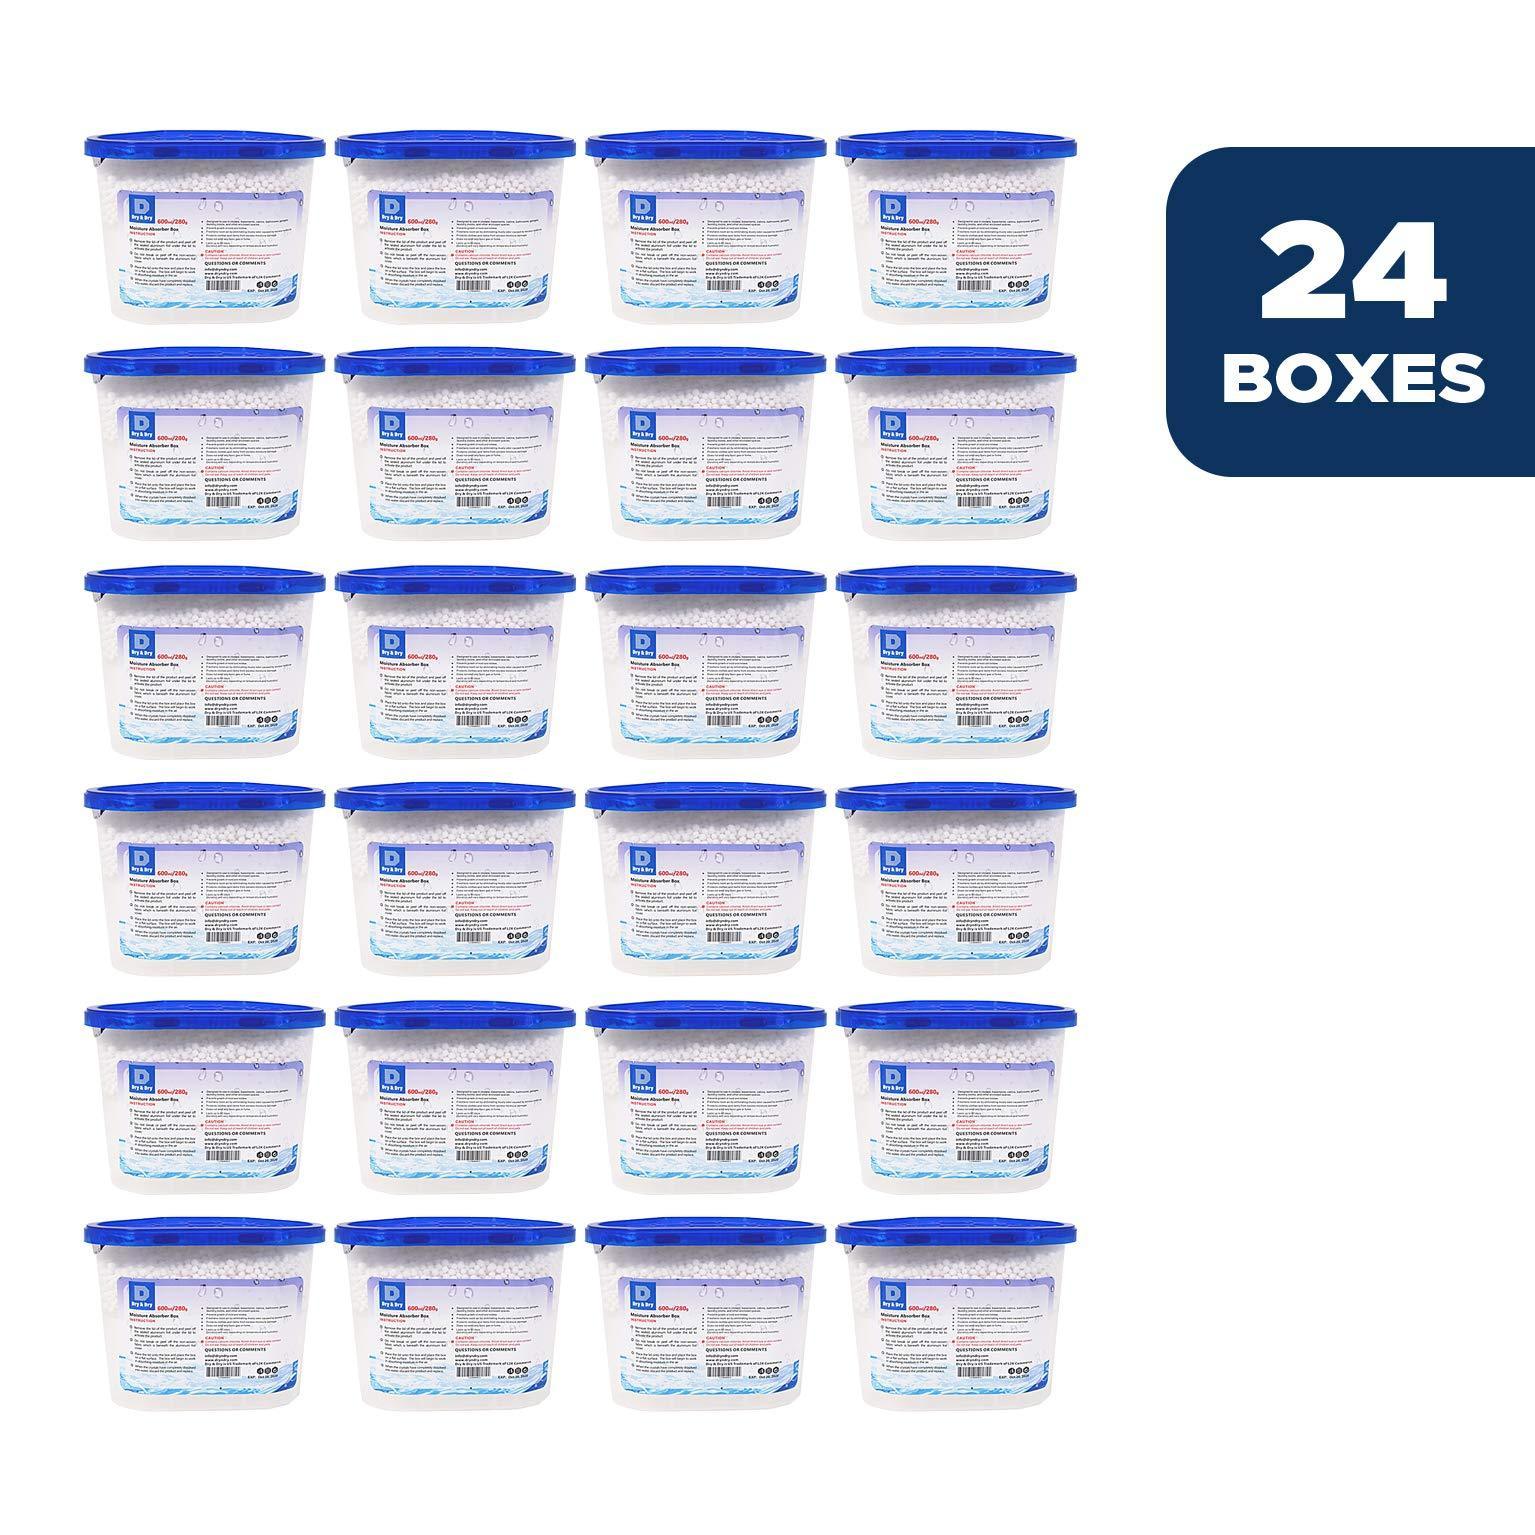 Online shopping dry dry 24 boxes net 10 oz box premium moisture absorber musty odor eliminator boxes to control excess moisture for basements closets bathrooms laundry rooms